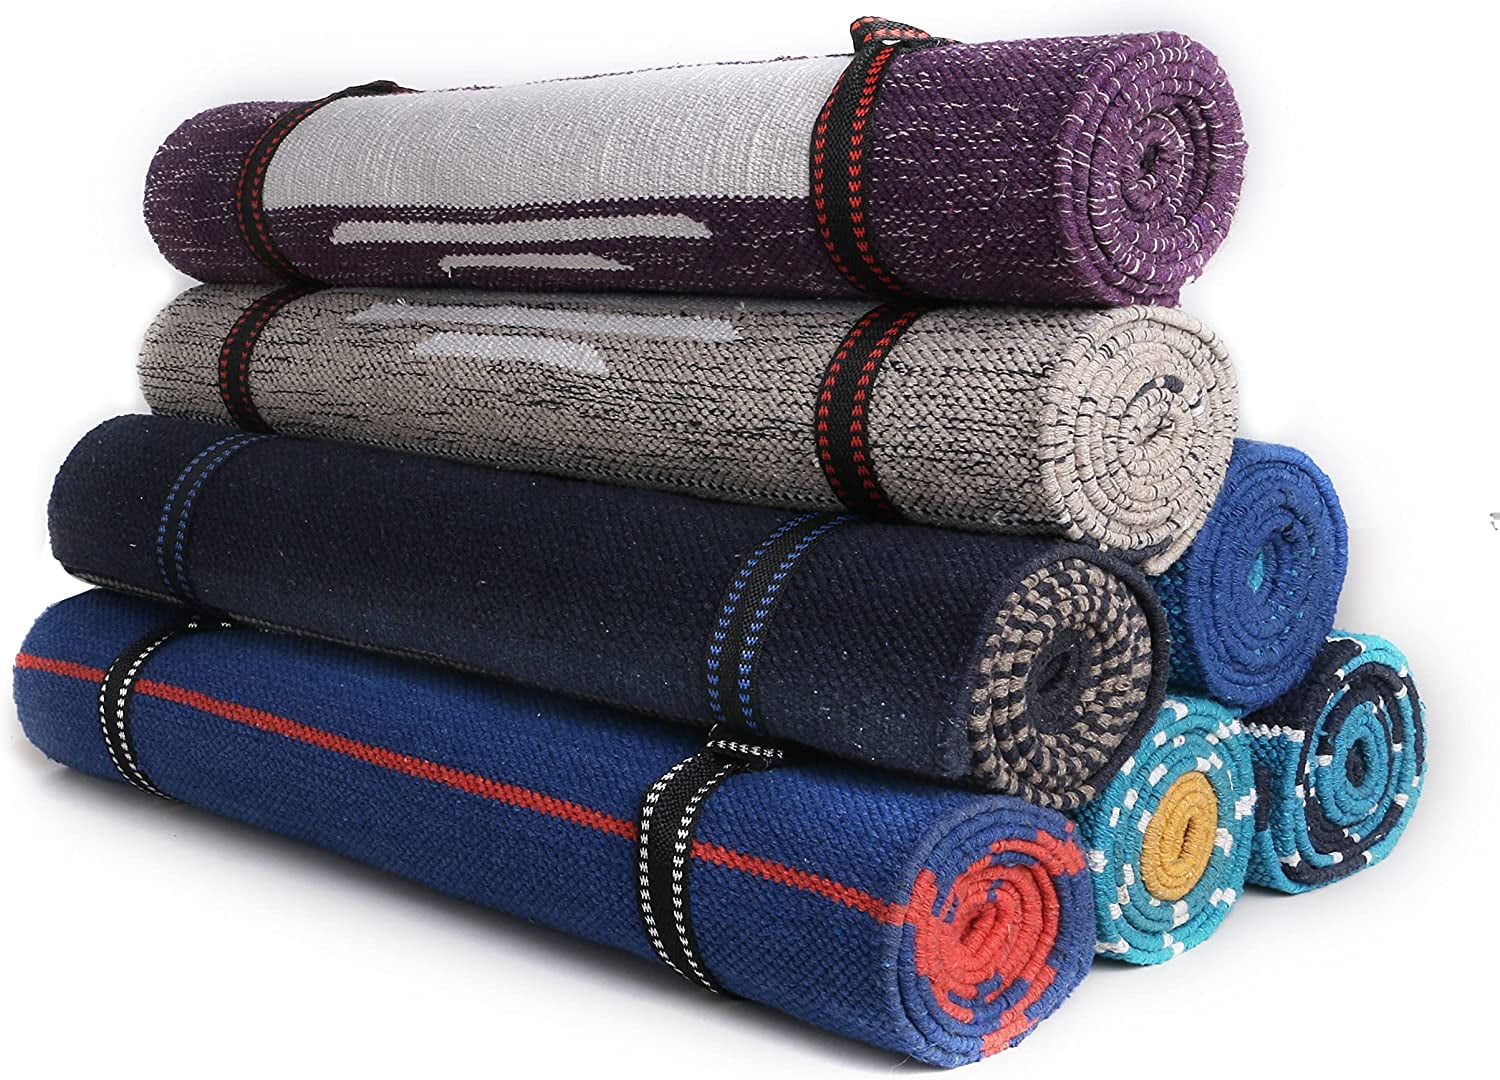 Top Rated Products in Yoga Mats & Bags